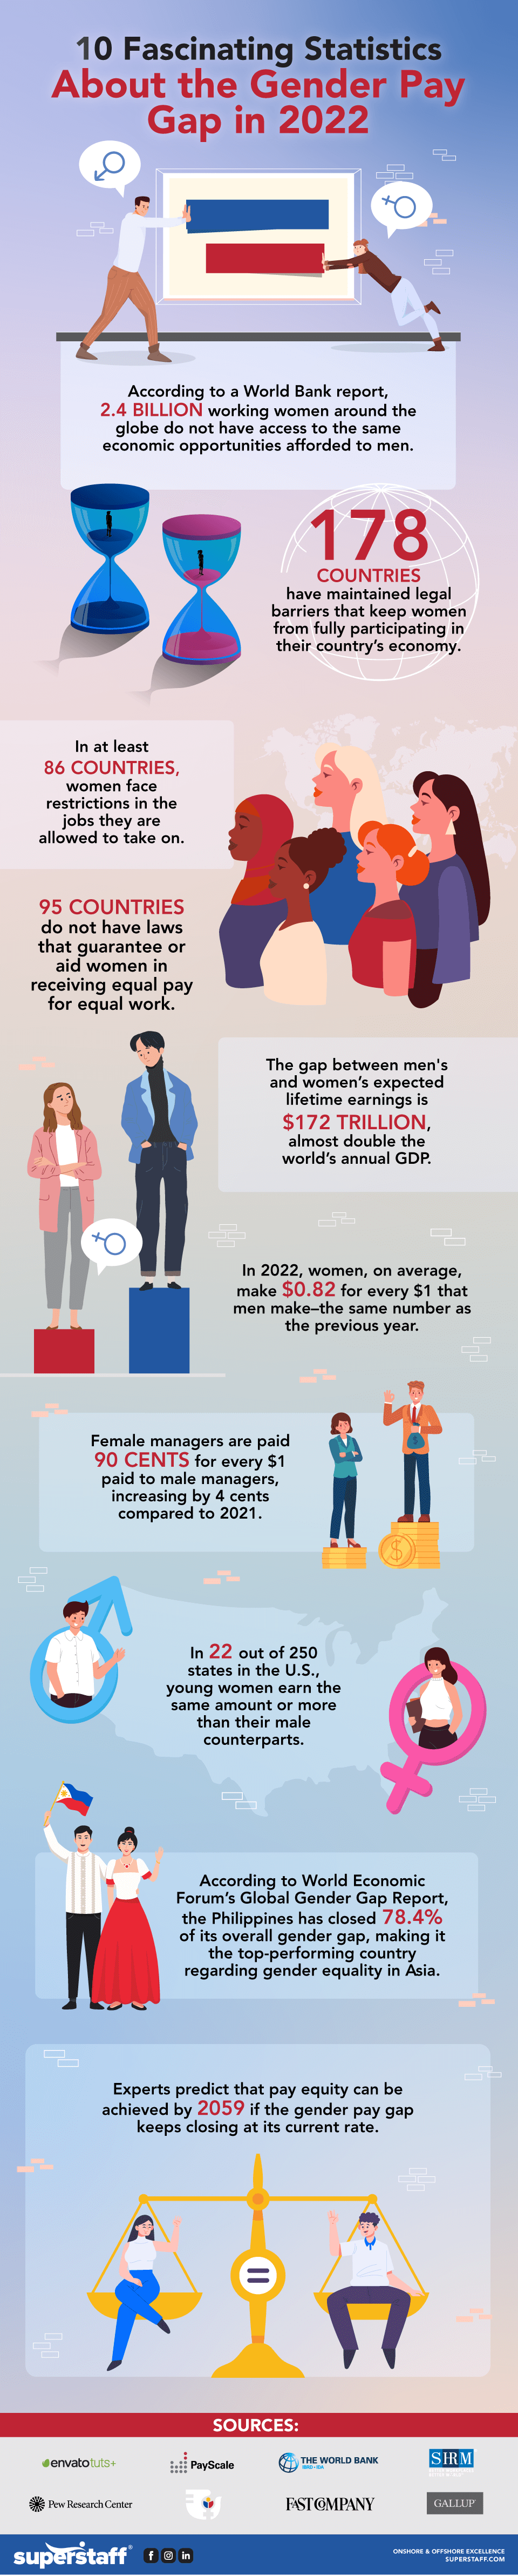 Top 10 Statistics About Gender Pay Gap in 2022